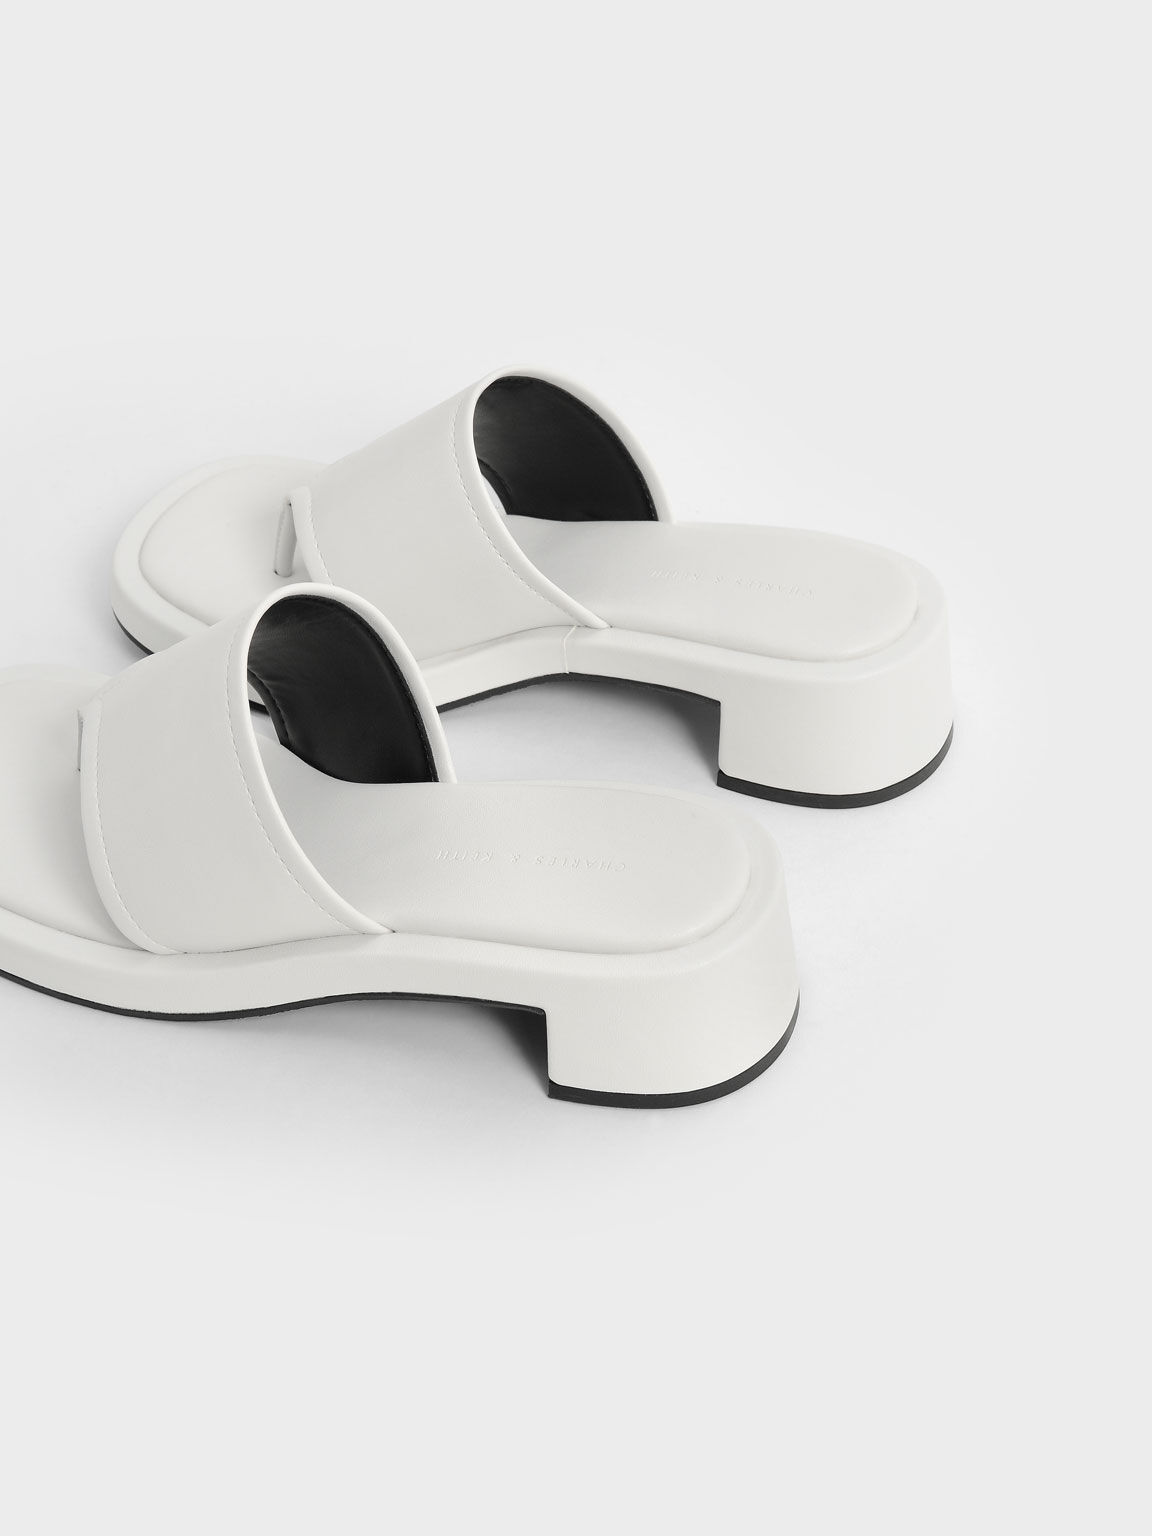 Padded Thong Sandals, White, hi-res